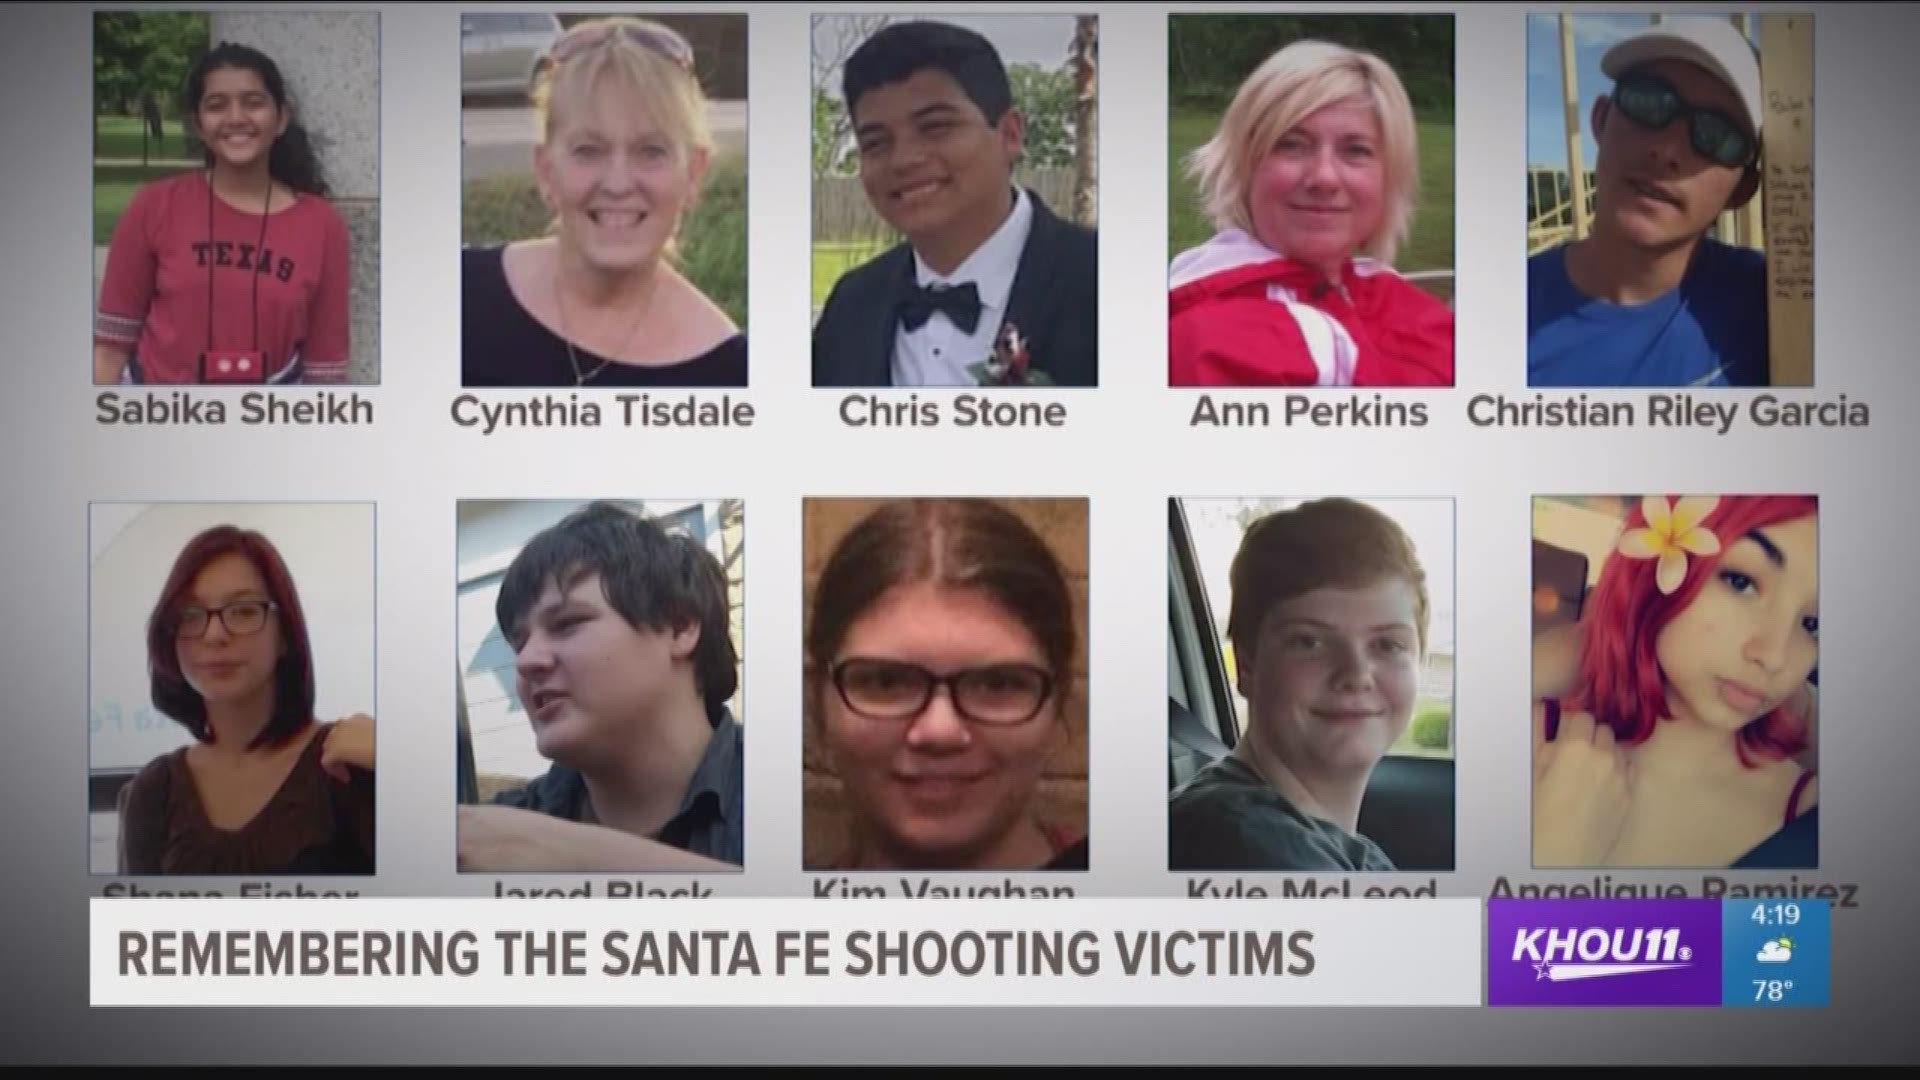 Eight students and two teachers died when a student opened fire at Santa Fe High School. Ten bright lights dimmed too soon. Remember their names and pray for their families.